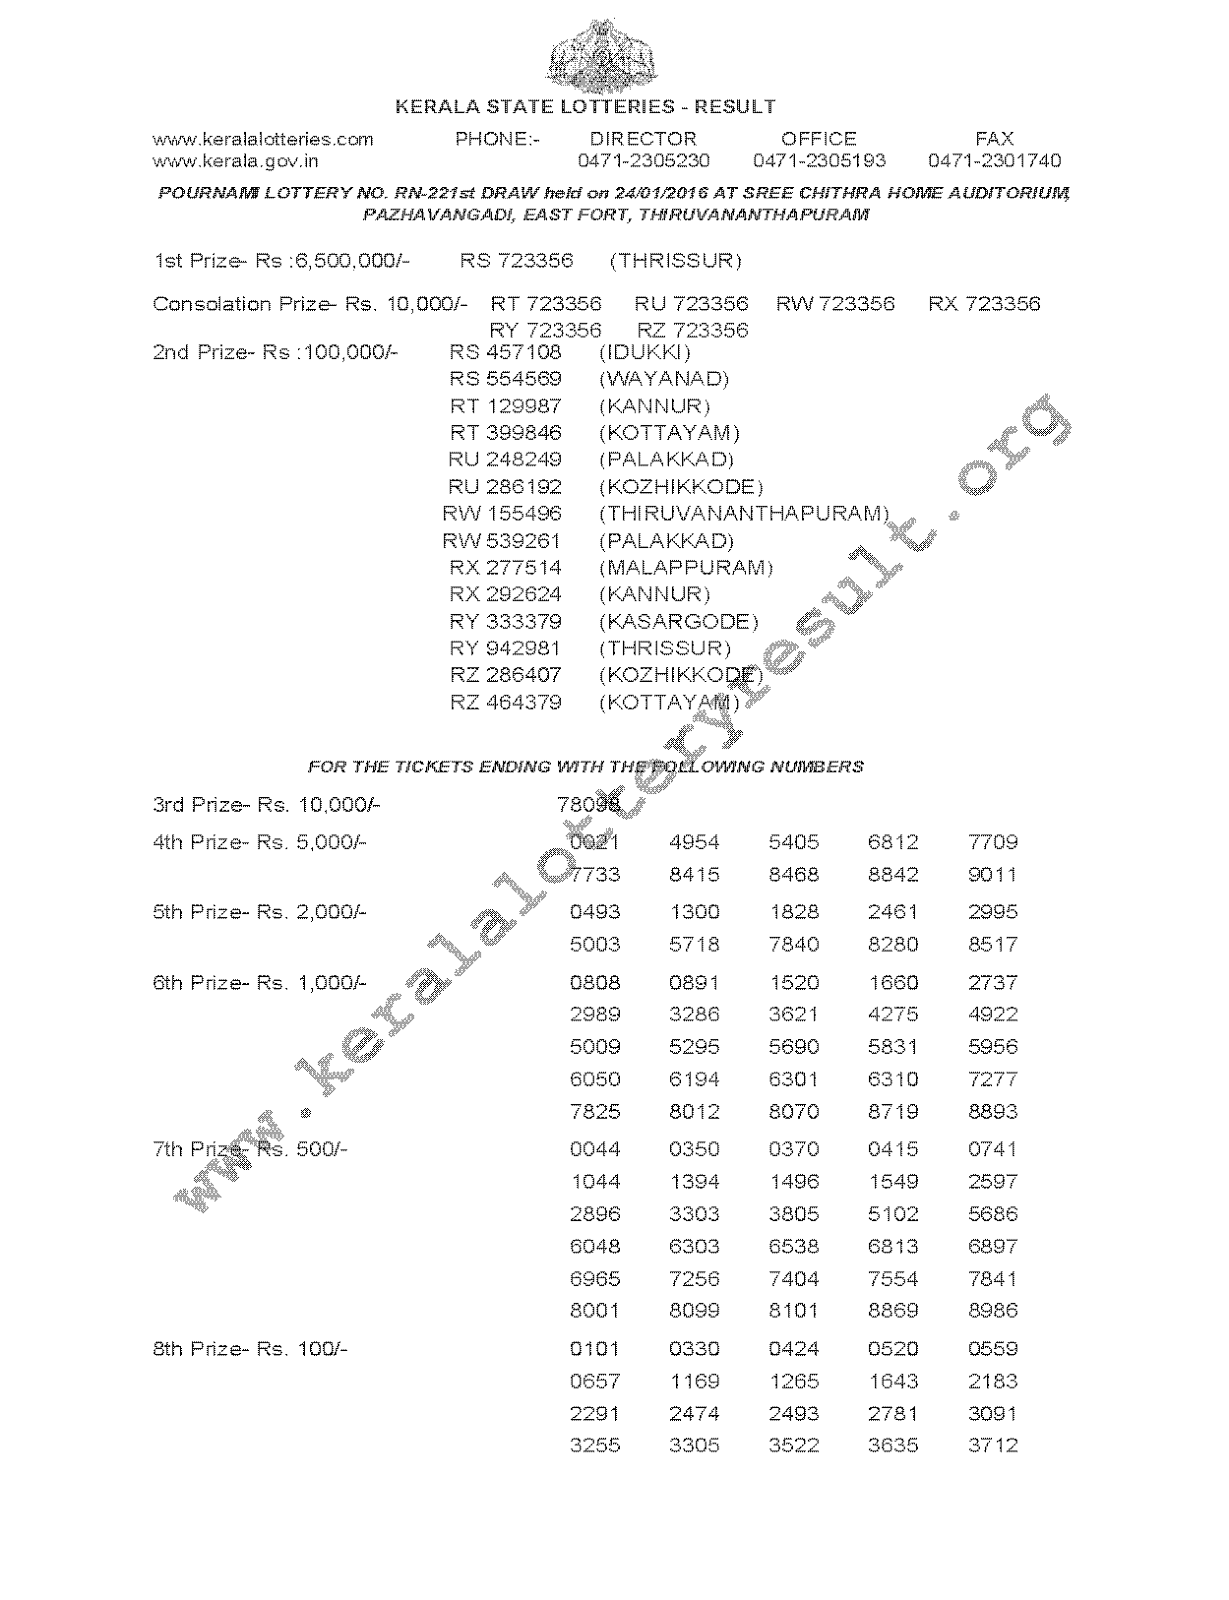 POURNAMI Lottery RN 221 Result 24-1-2016